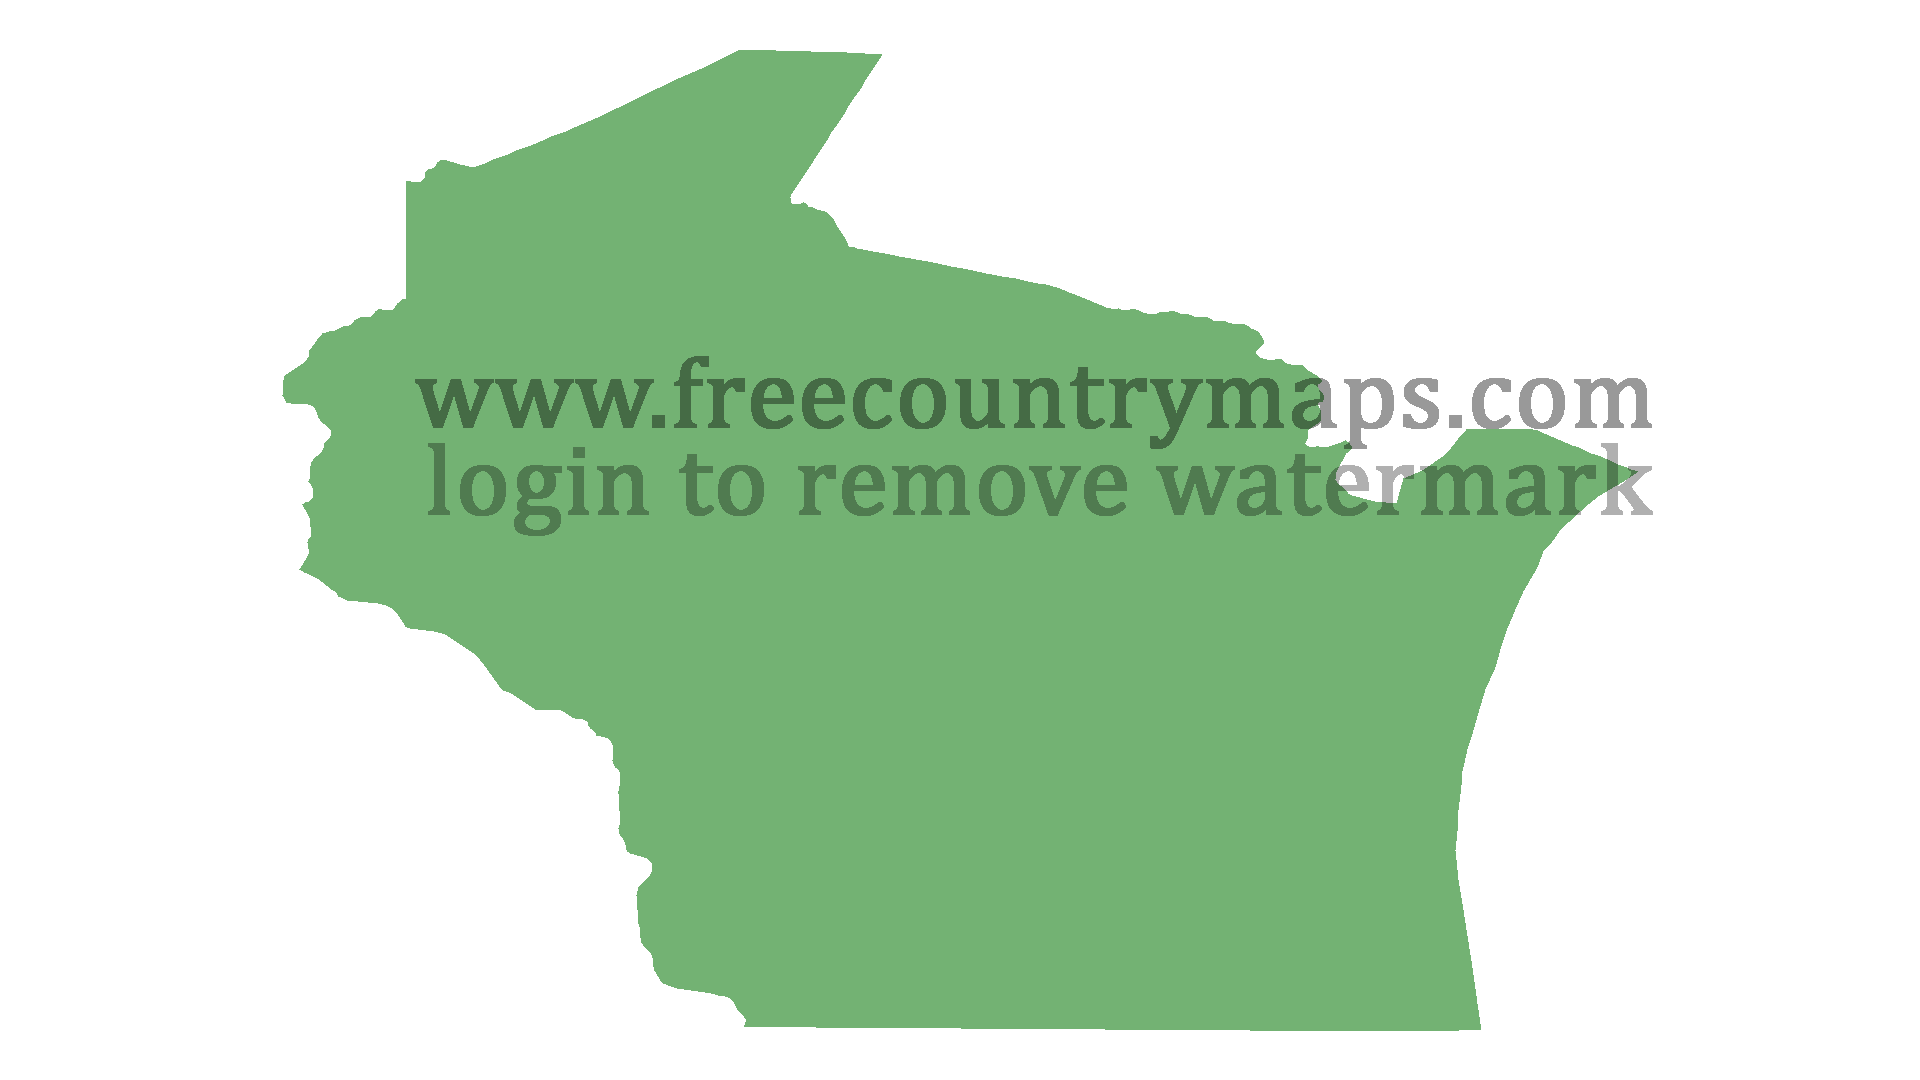 Blank Map of the State of Wisconsin in 1080p